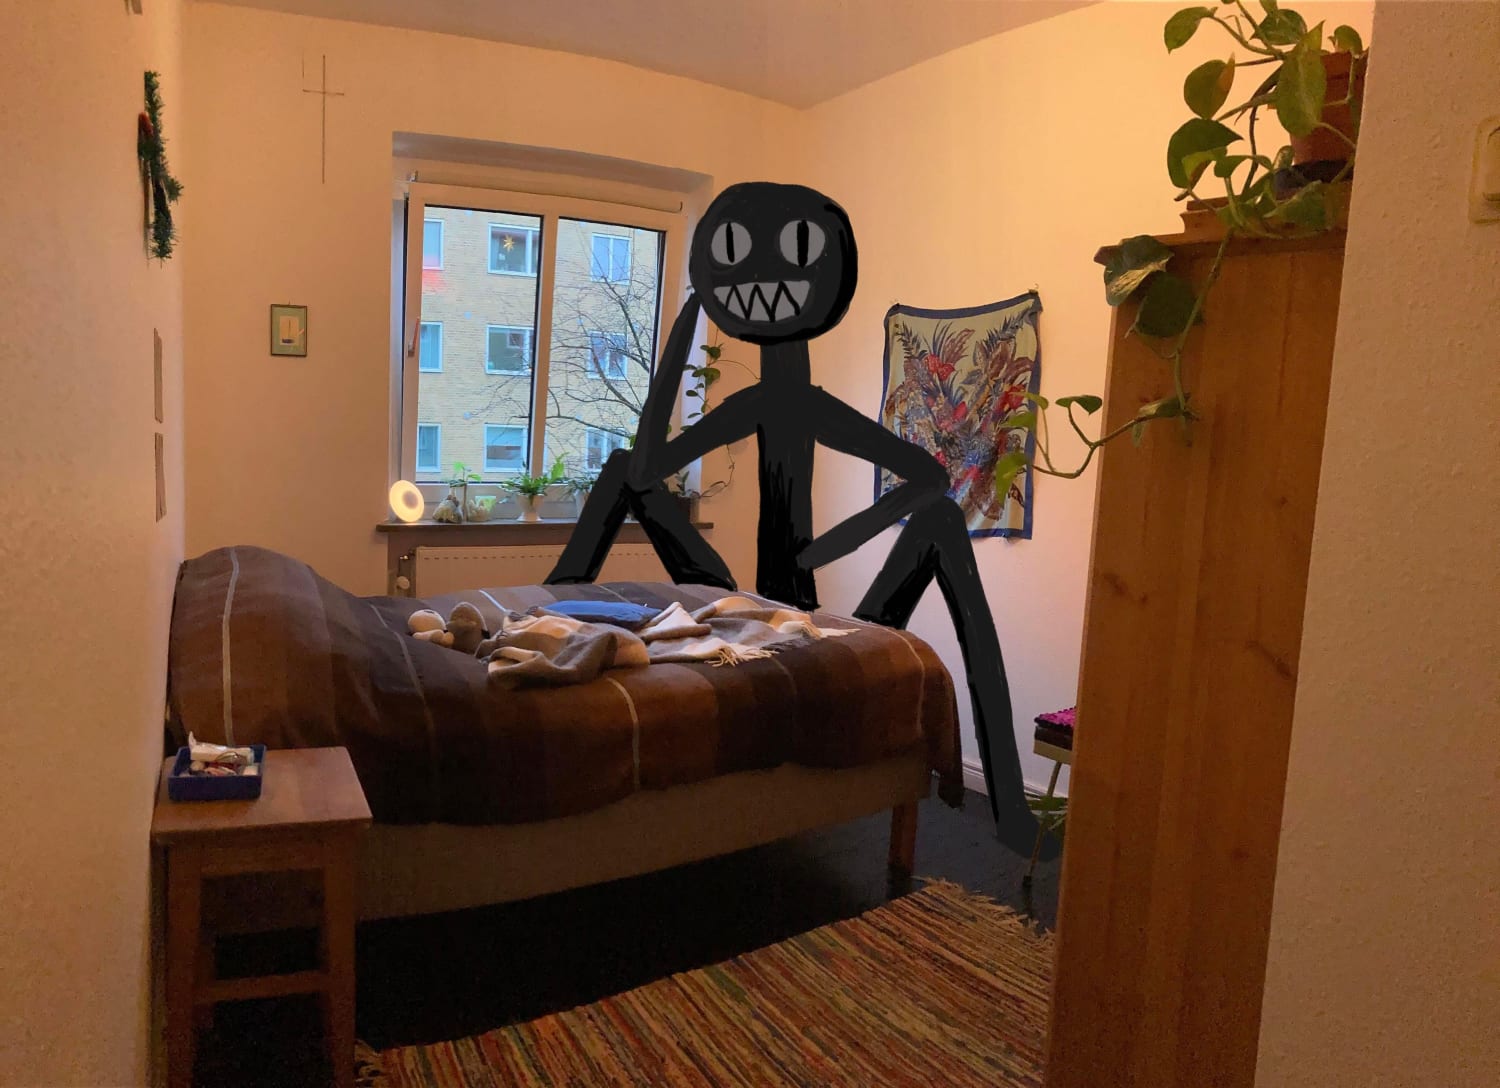 Should I make a giant papier-maché stick figure for my bedroom? (see sketch)